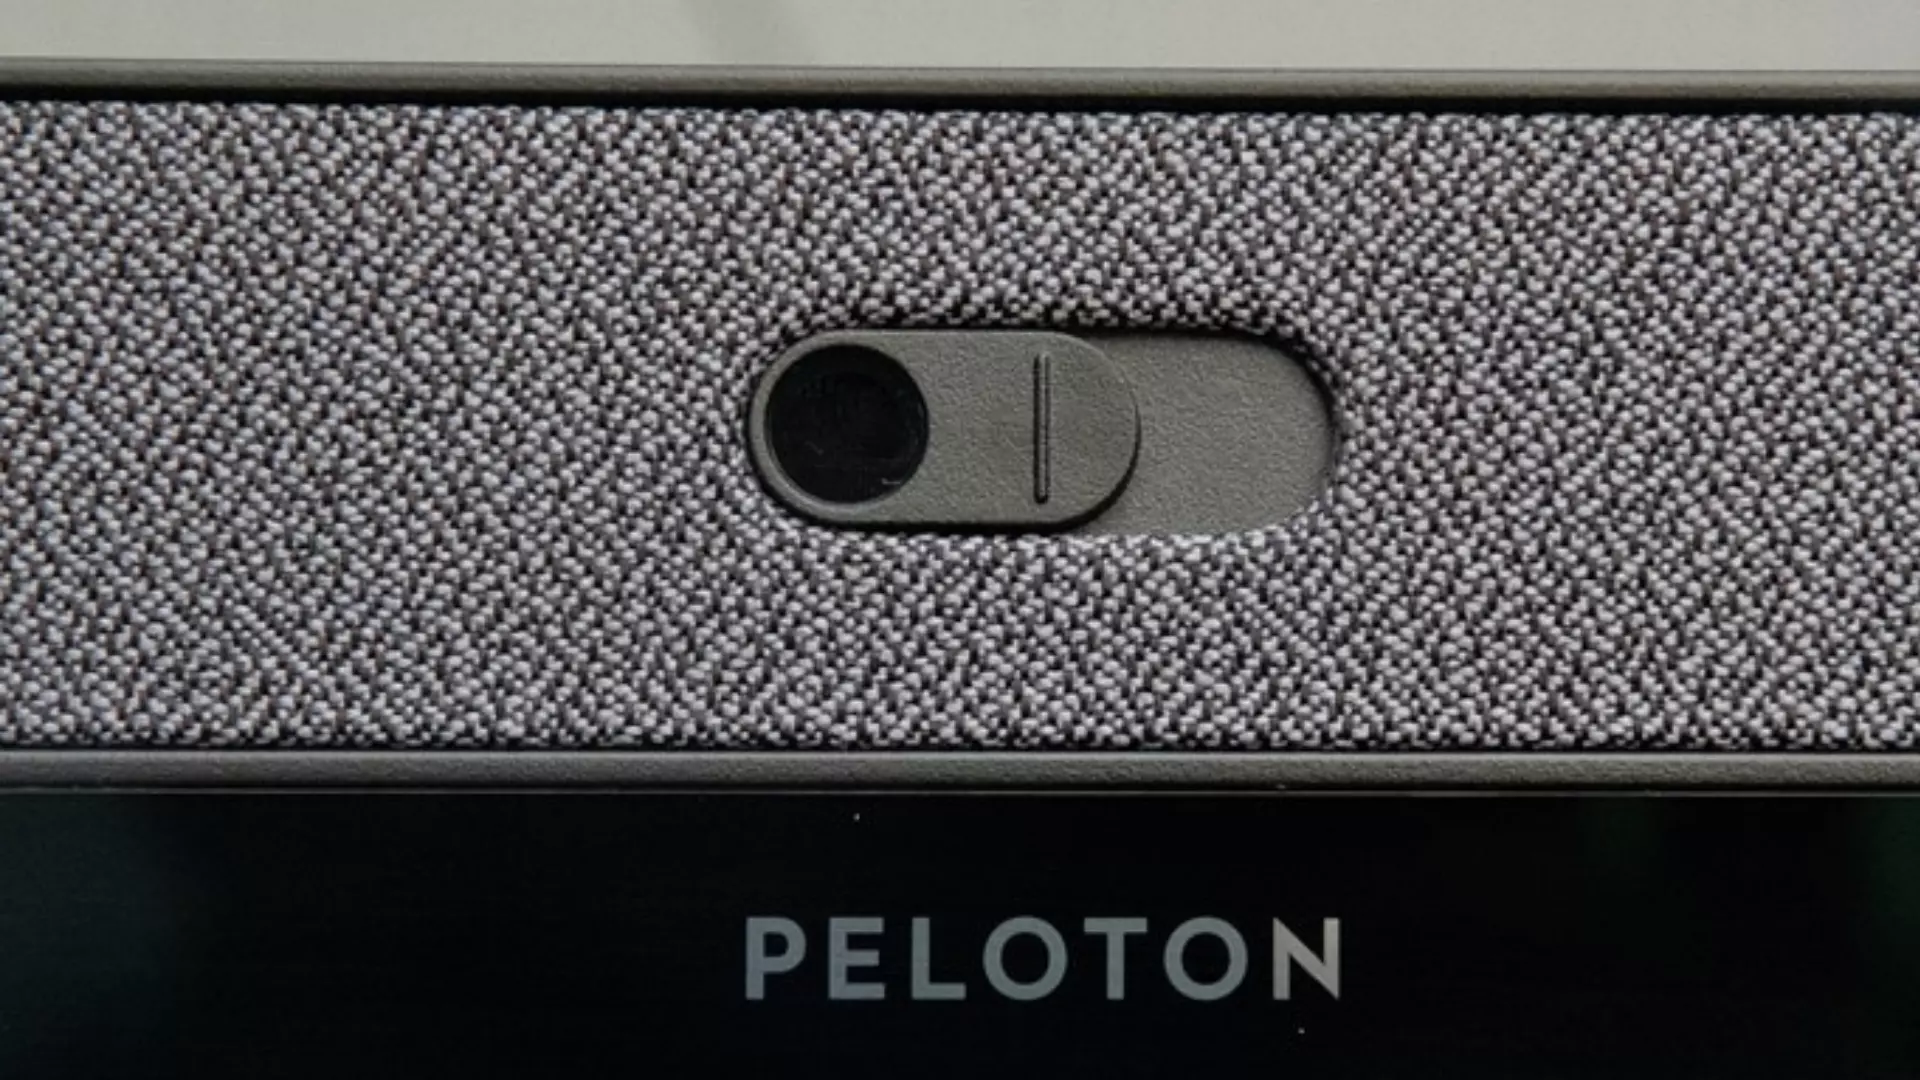 Why Peloton Camera is Essential